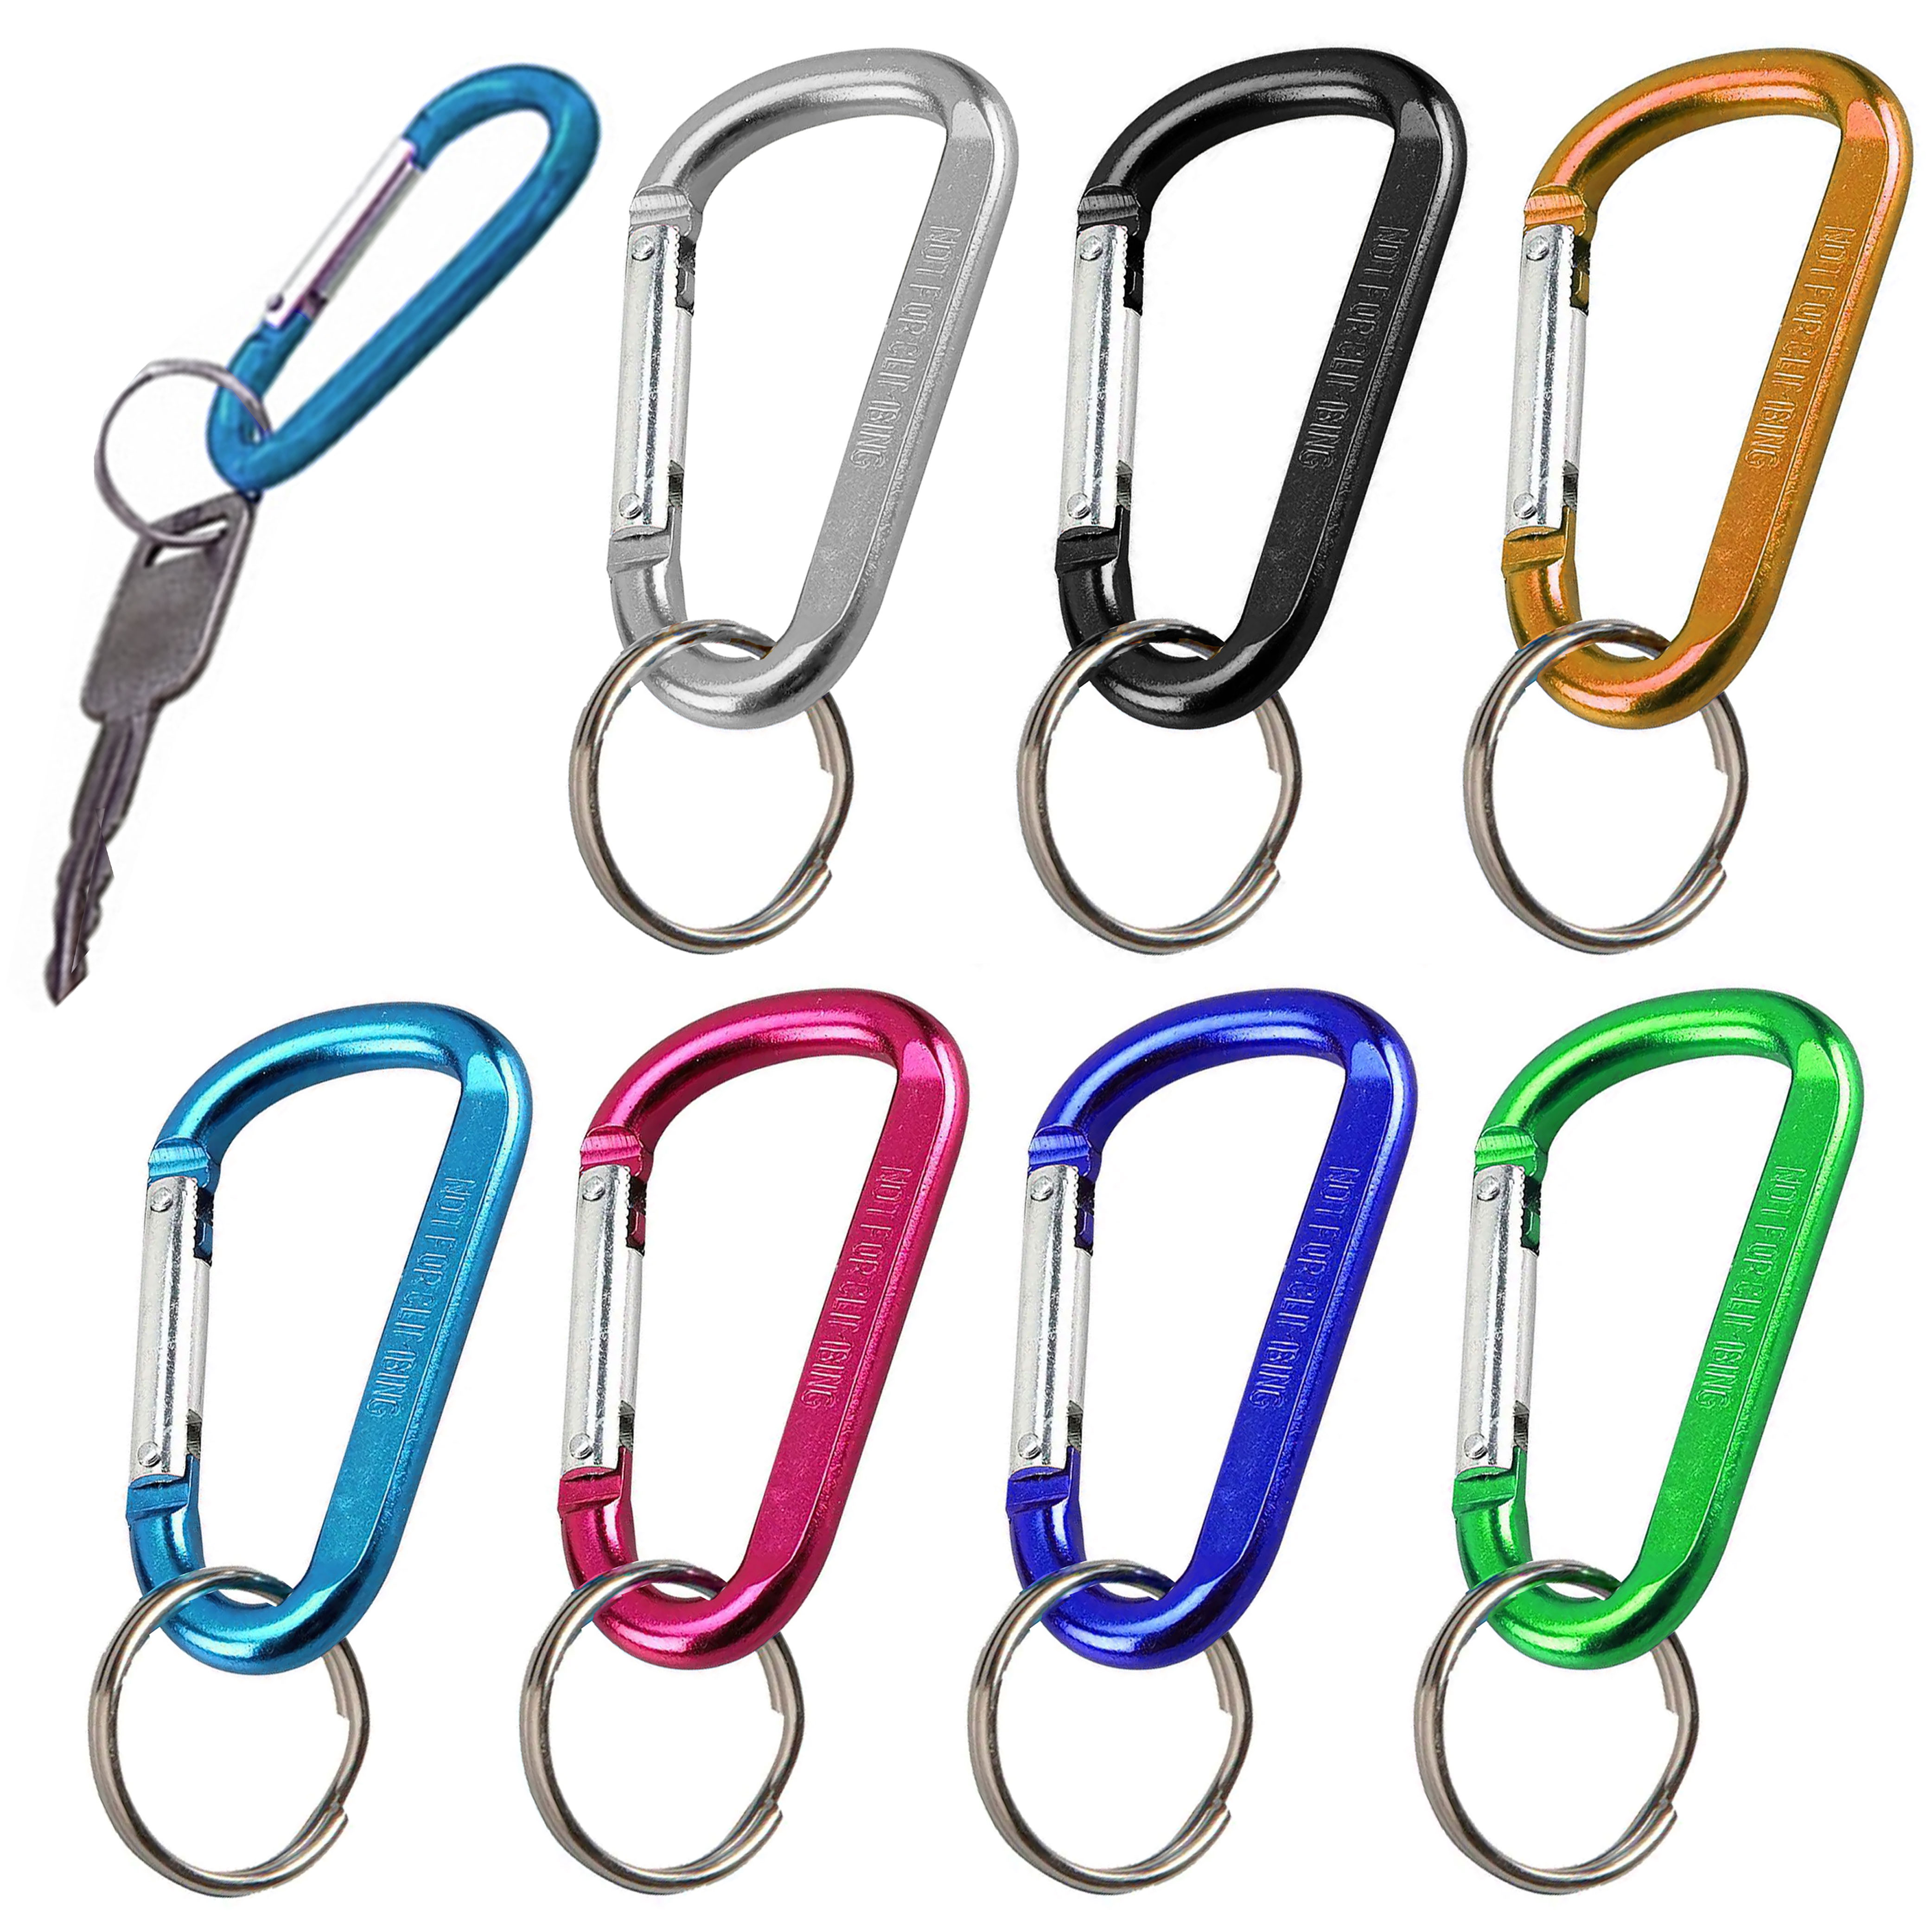 48/68mm Aluminum Carabiner Silver Clip Clasp D-ring Locking Buckle Key Chain  2 Size Keychain Clip Hooks Clips Spring Buckle Gate 